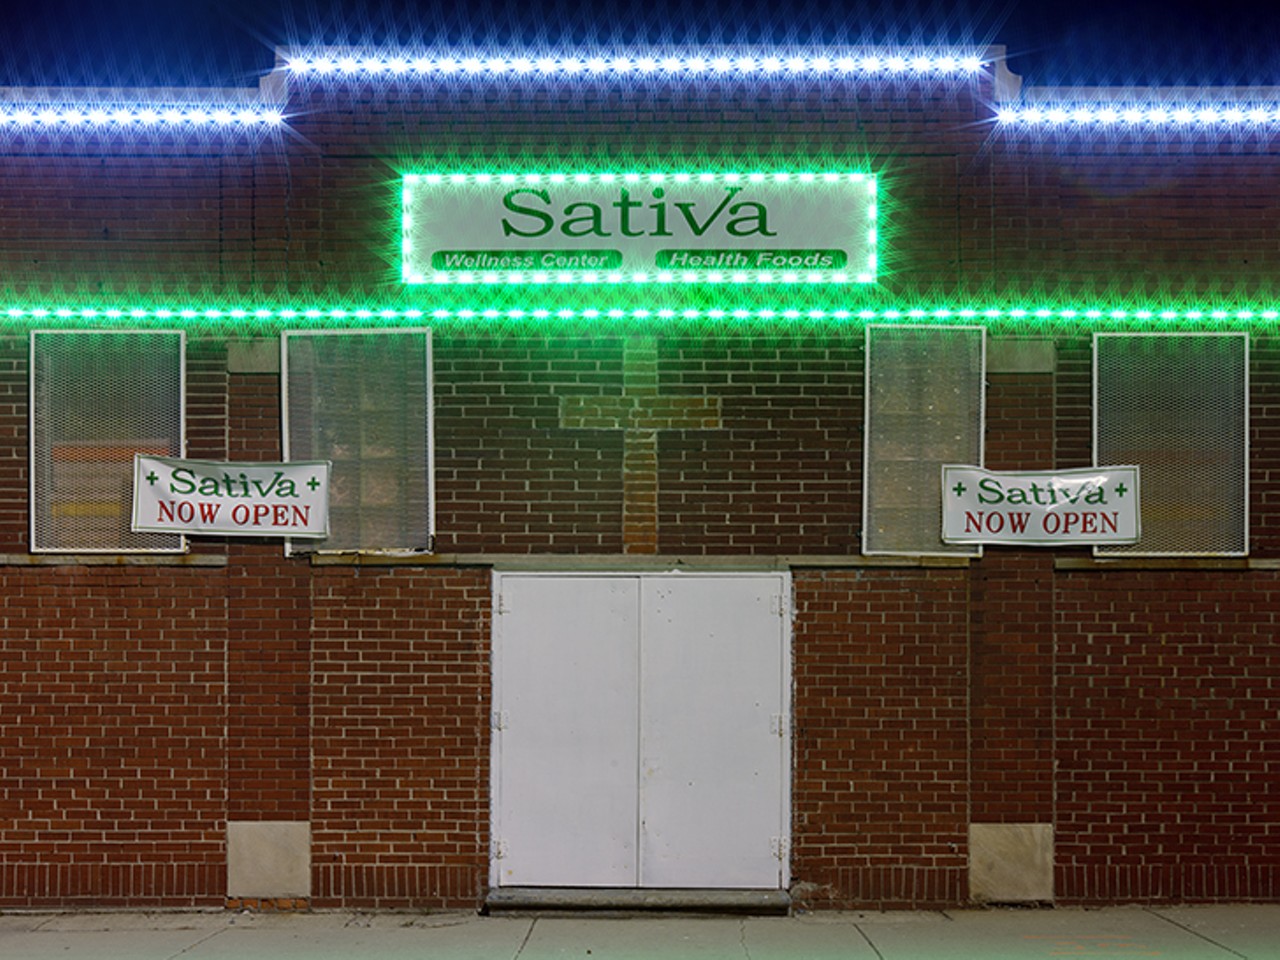 Photos show the early days of Detroit's medical marijuana industry &#151; before the crackdown